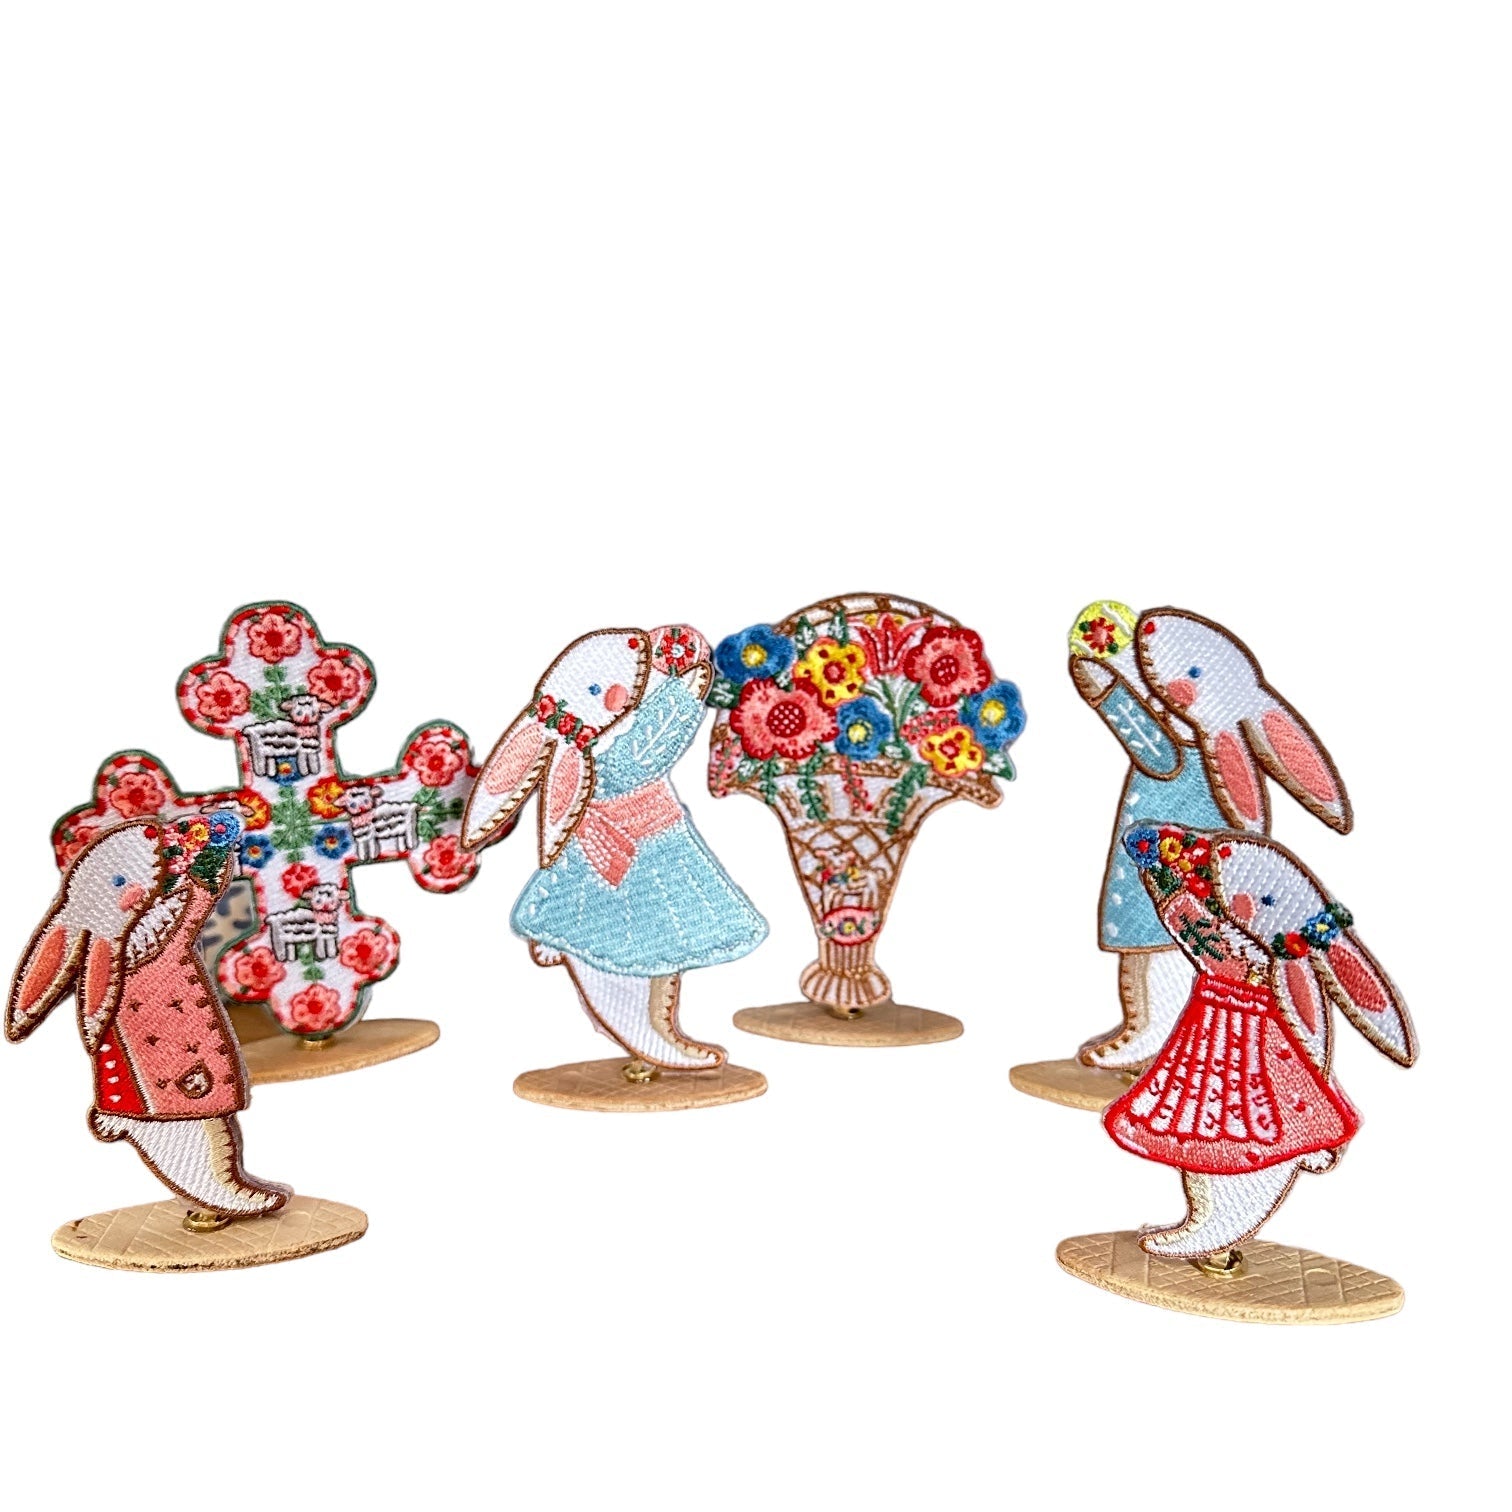 Easter figurines - Premium  from Tricia Lowenfield Design 